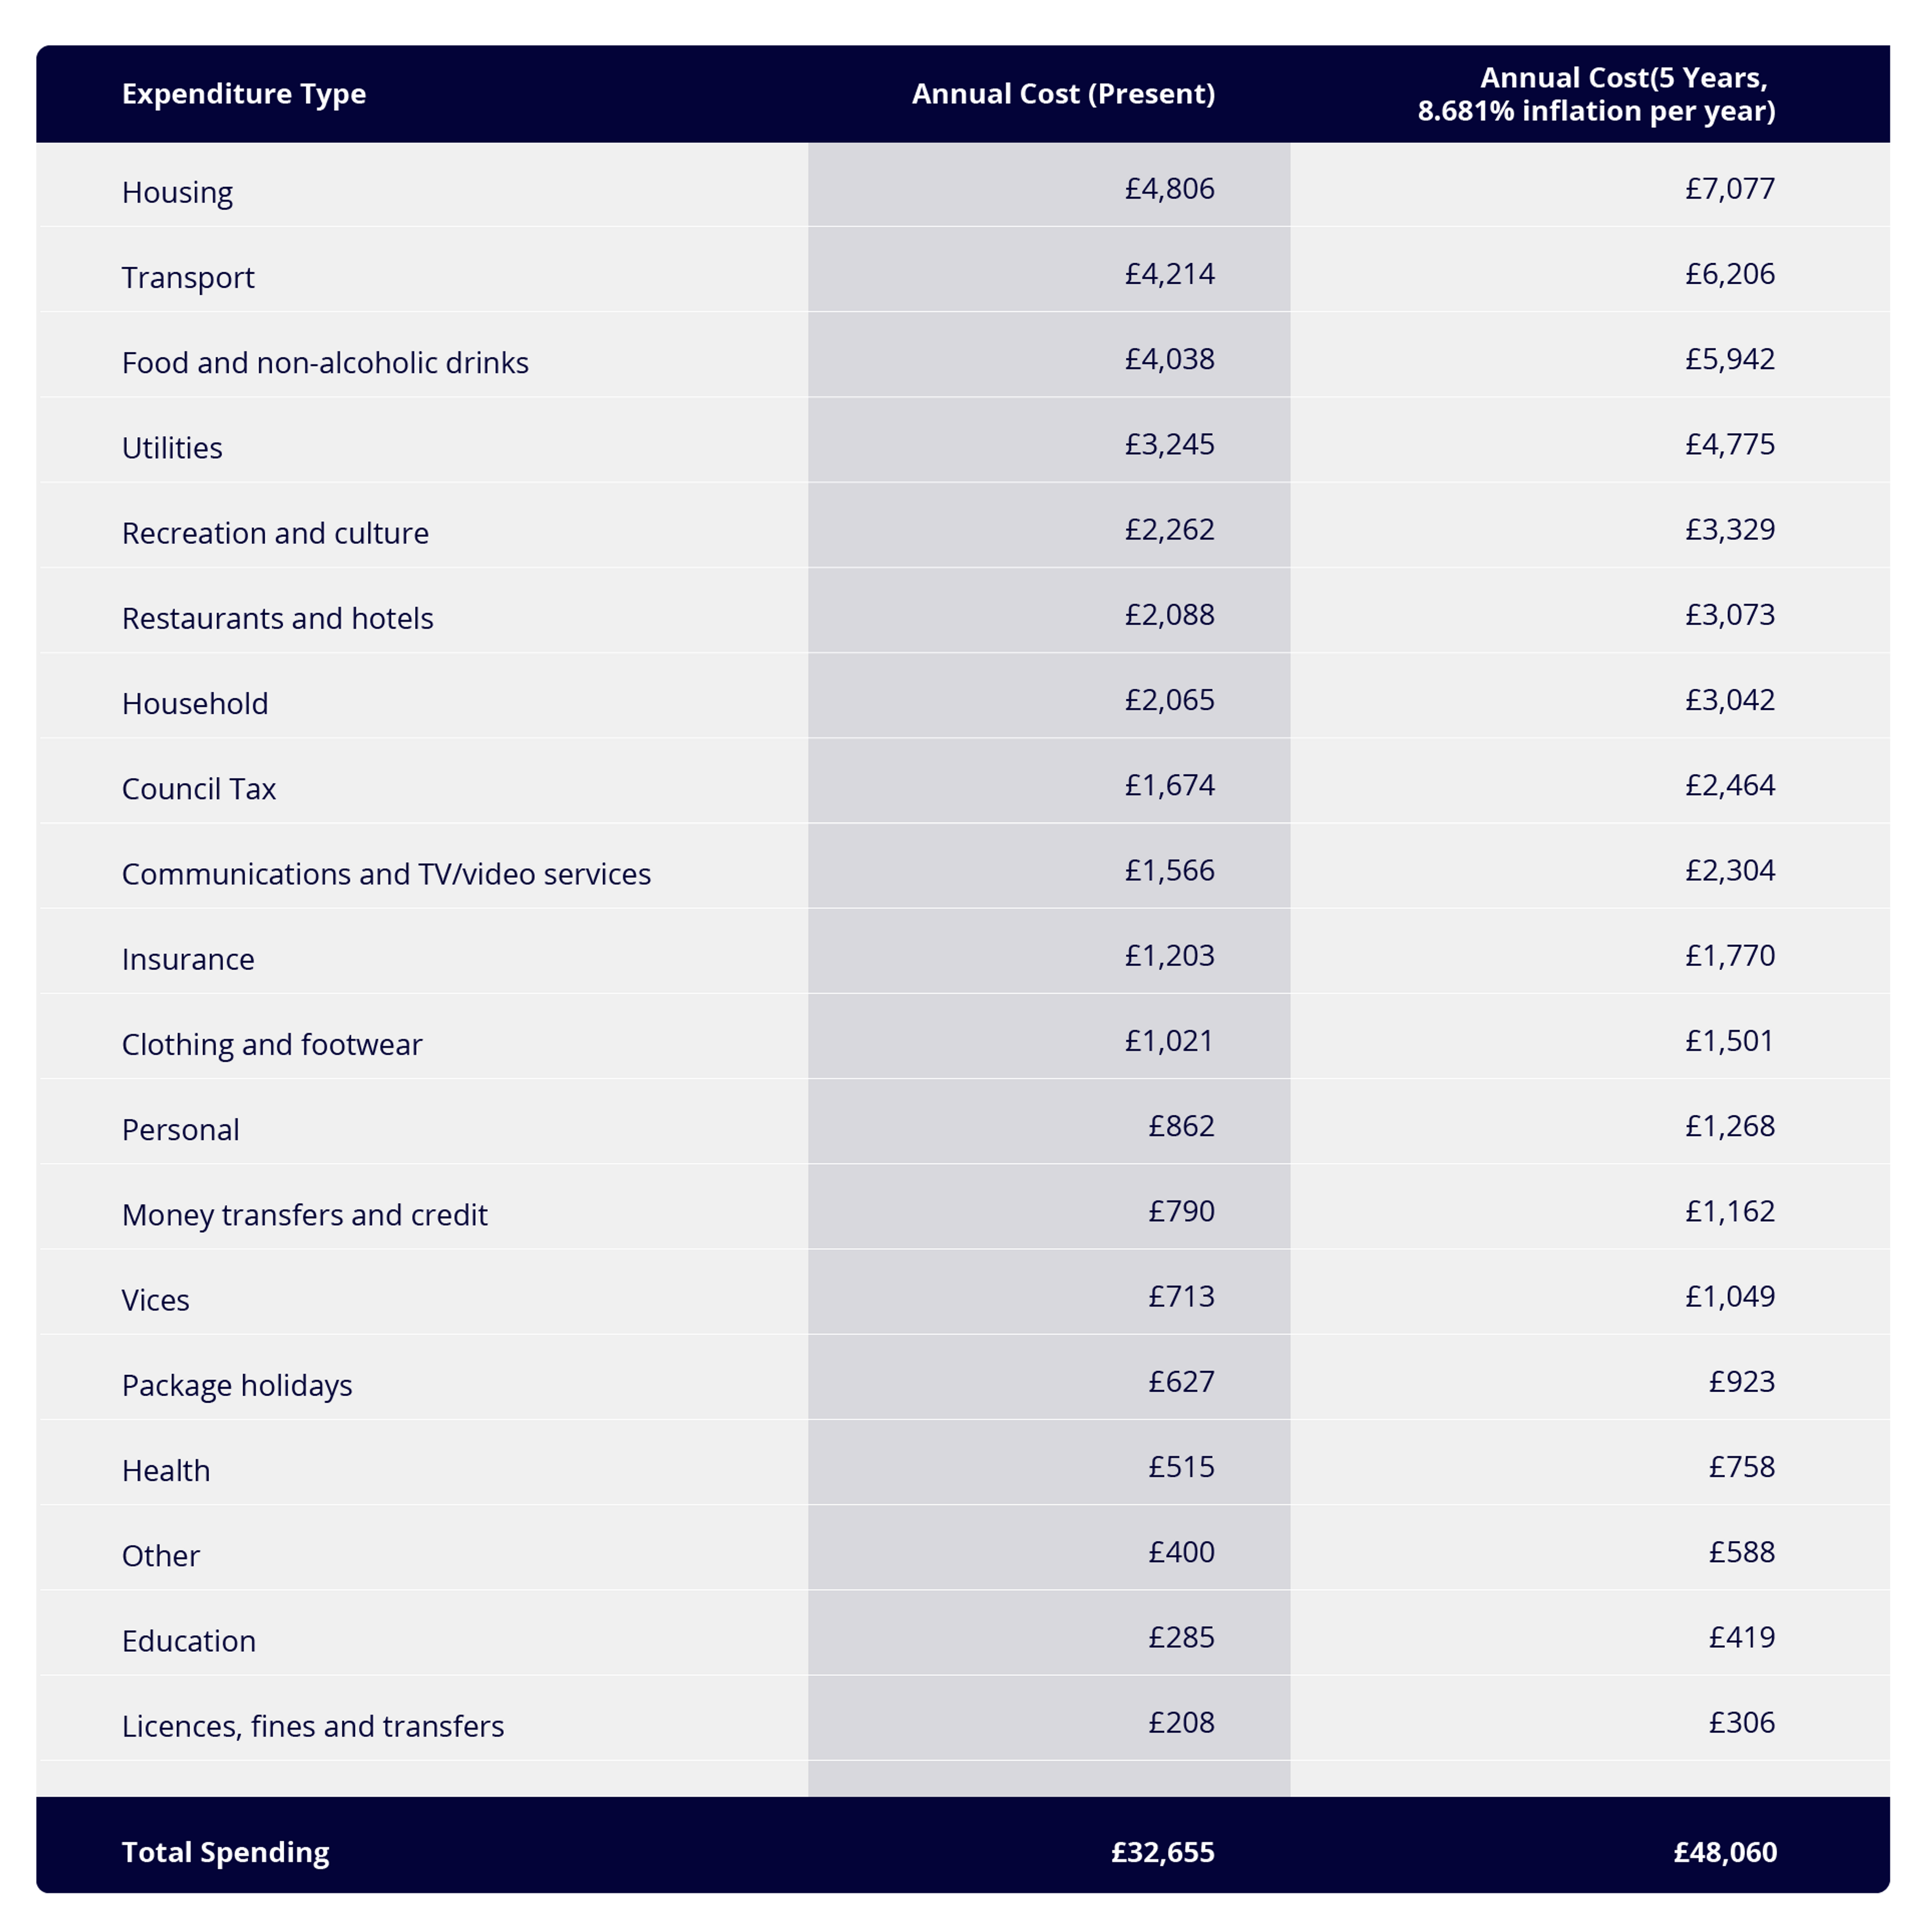 A table showing expenditure types, costs and inflation